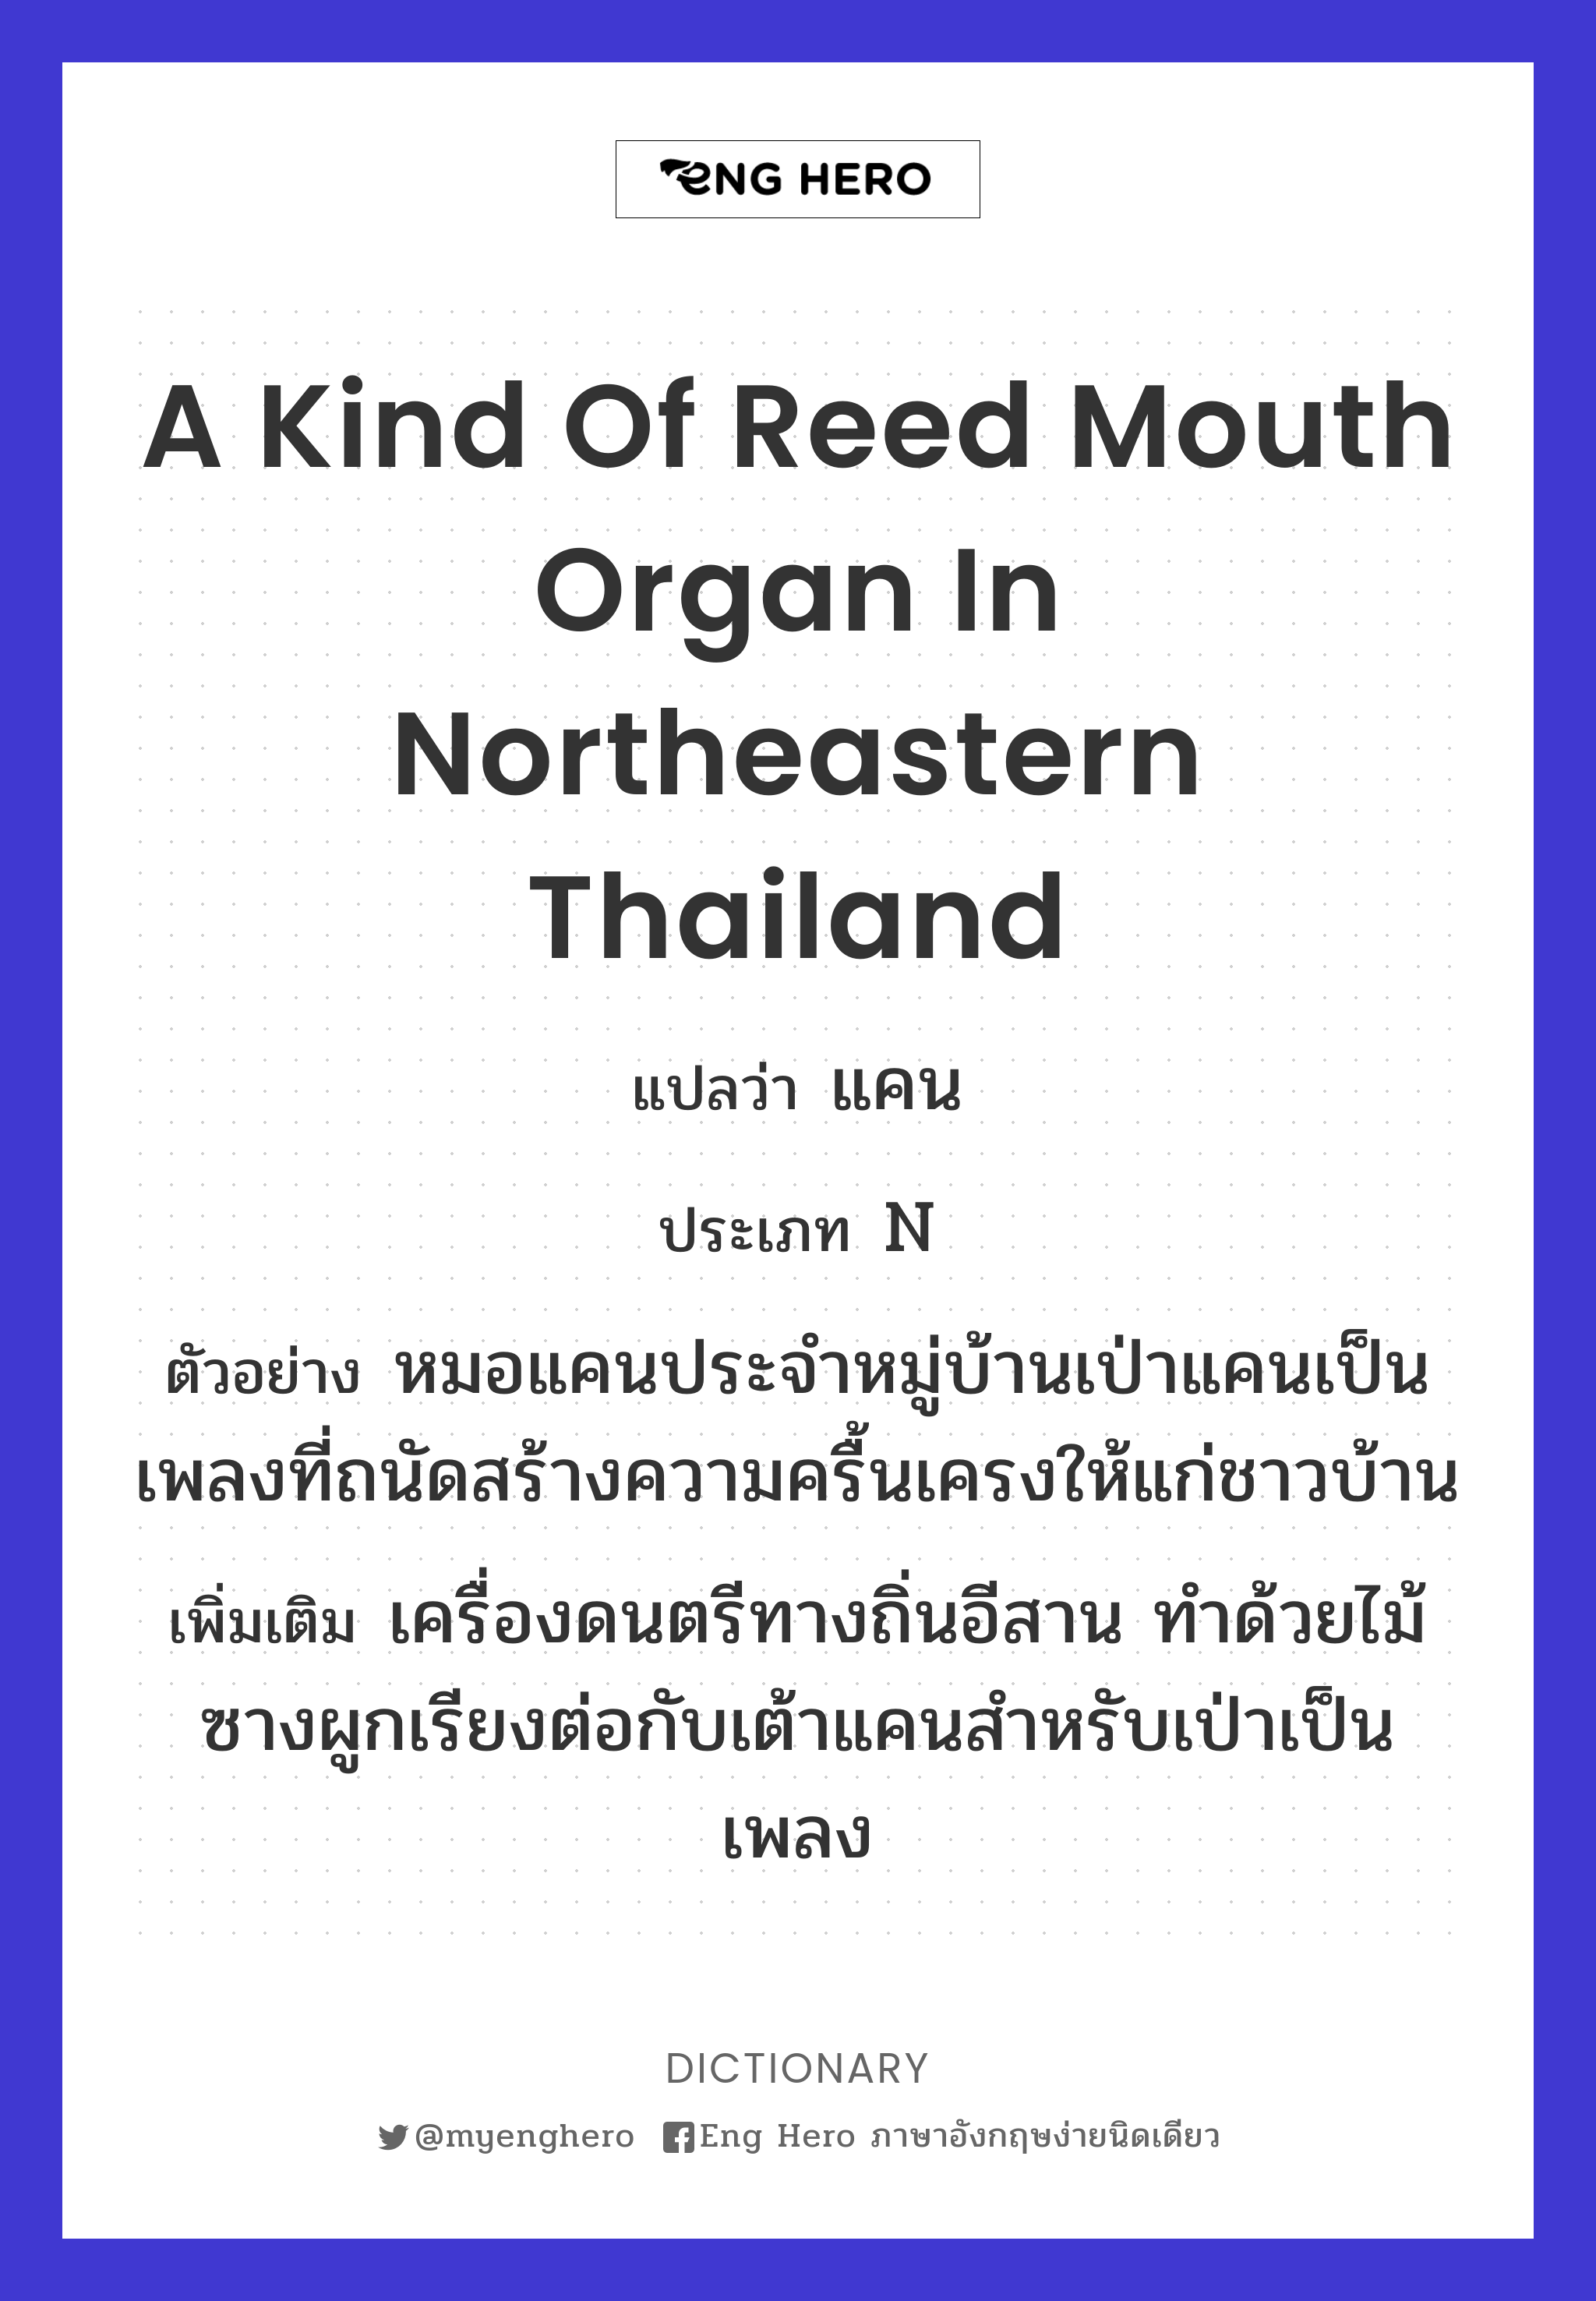 a kind of reed mouth organ in northeastern Thailand